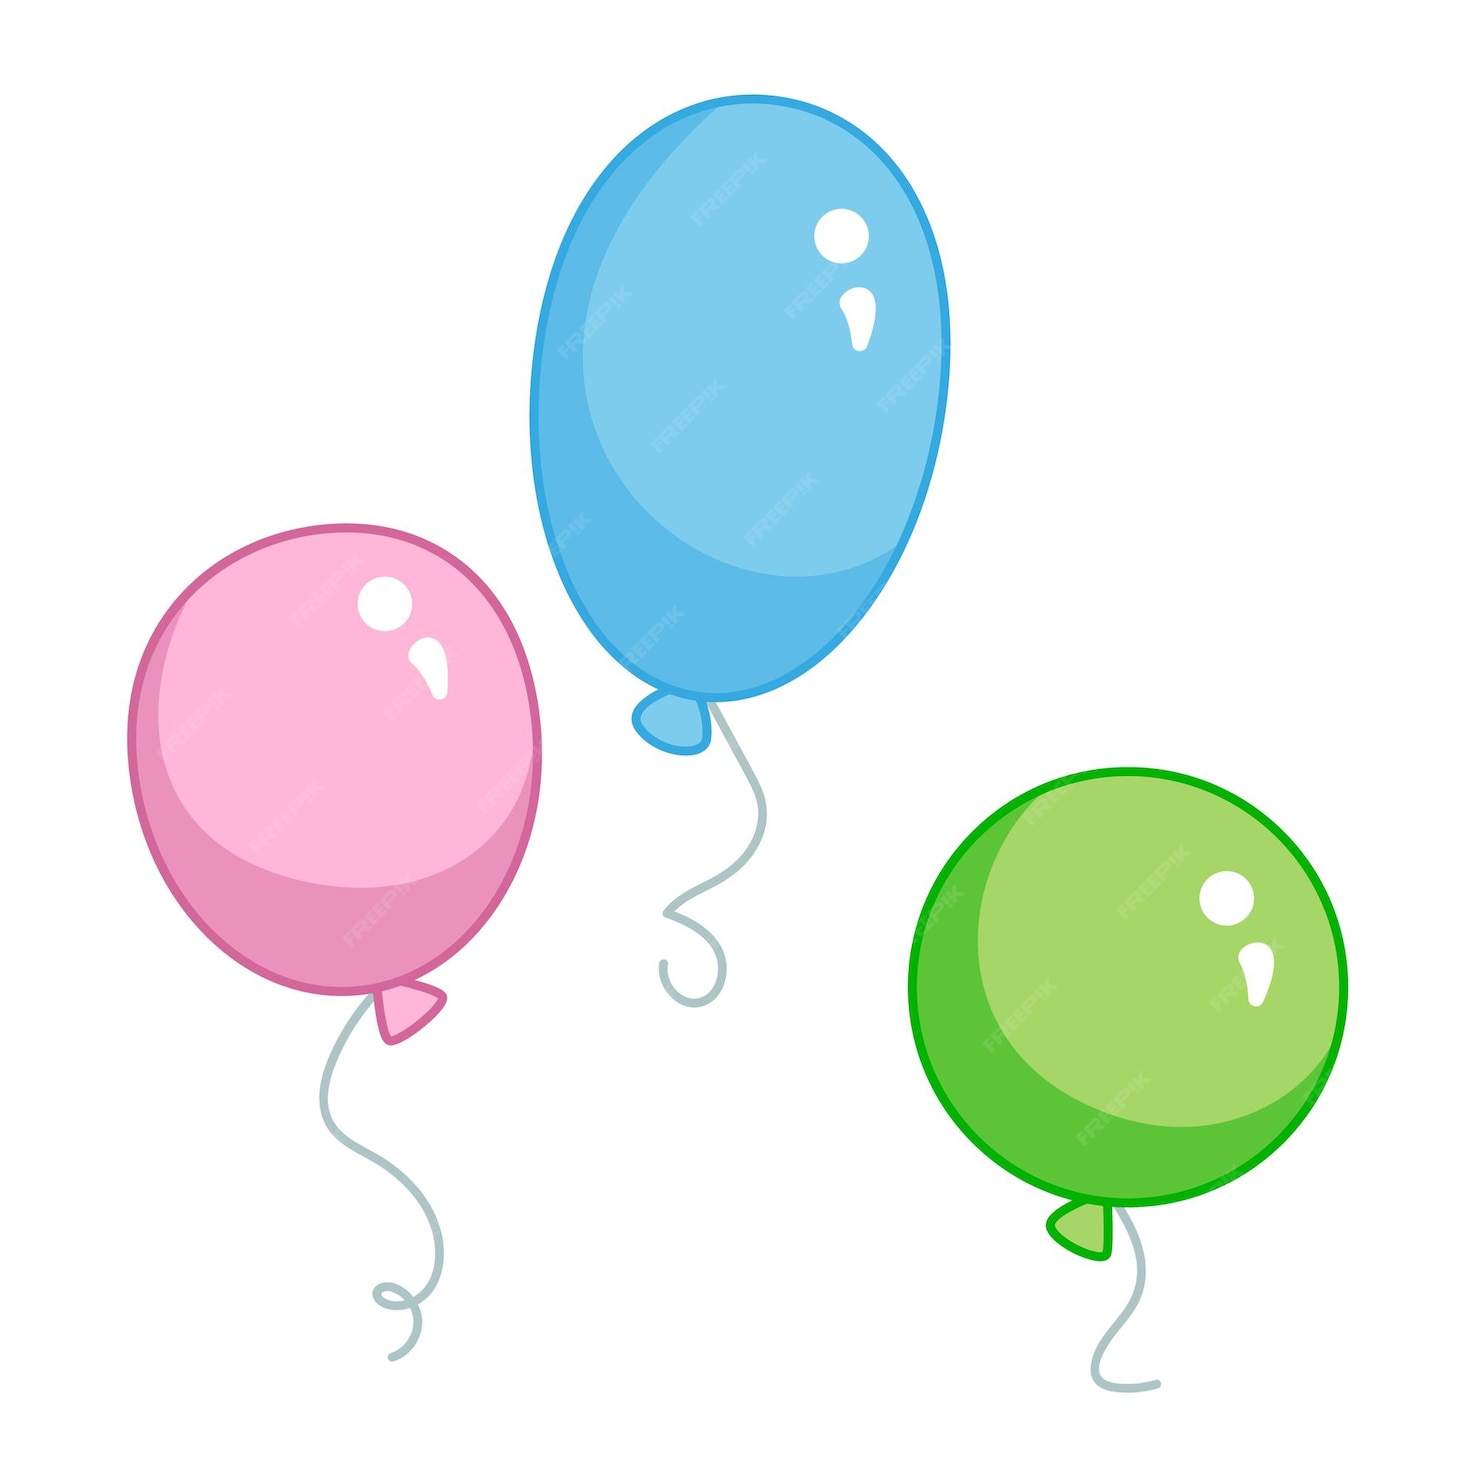 Premium Vector | A set of balloons of different colors pink blue green ...